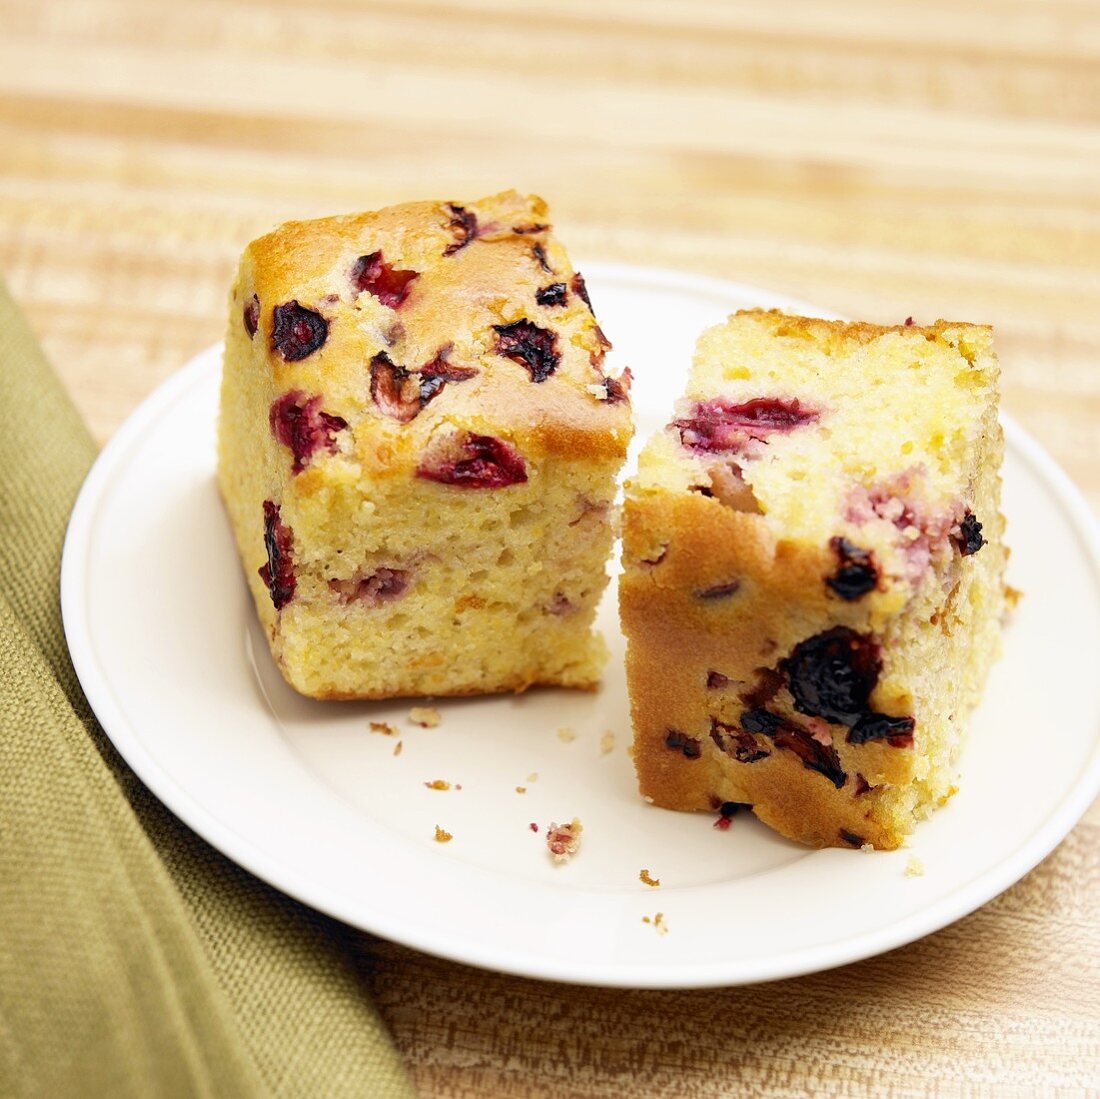 Two Pieces of Cranberry Corn Bread on White Plate